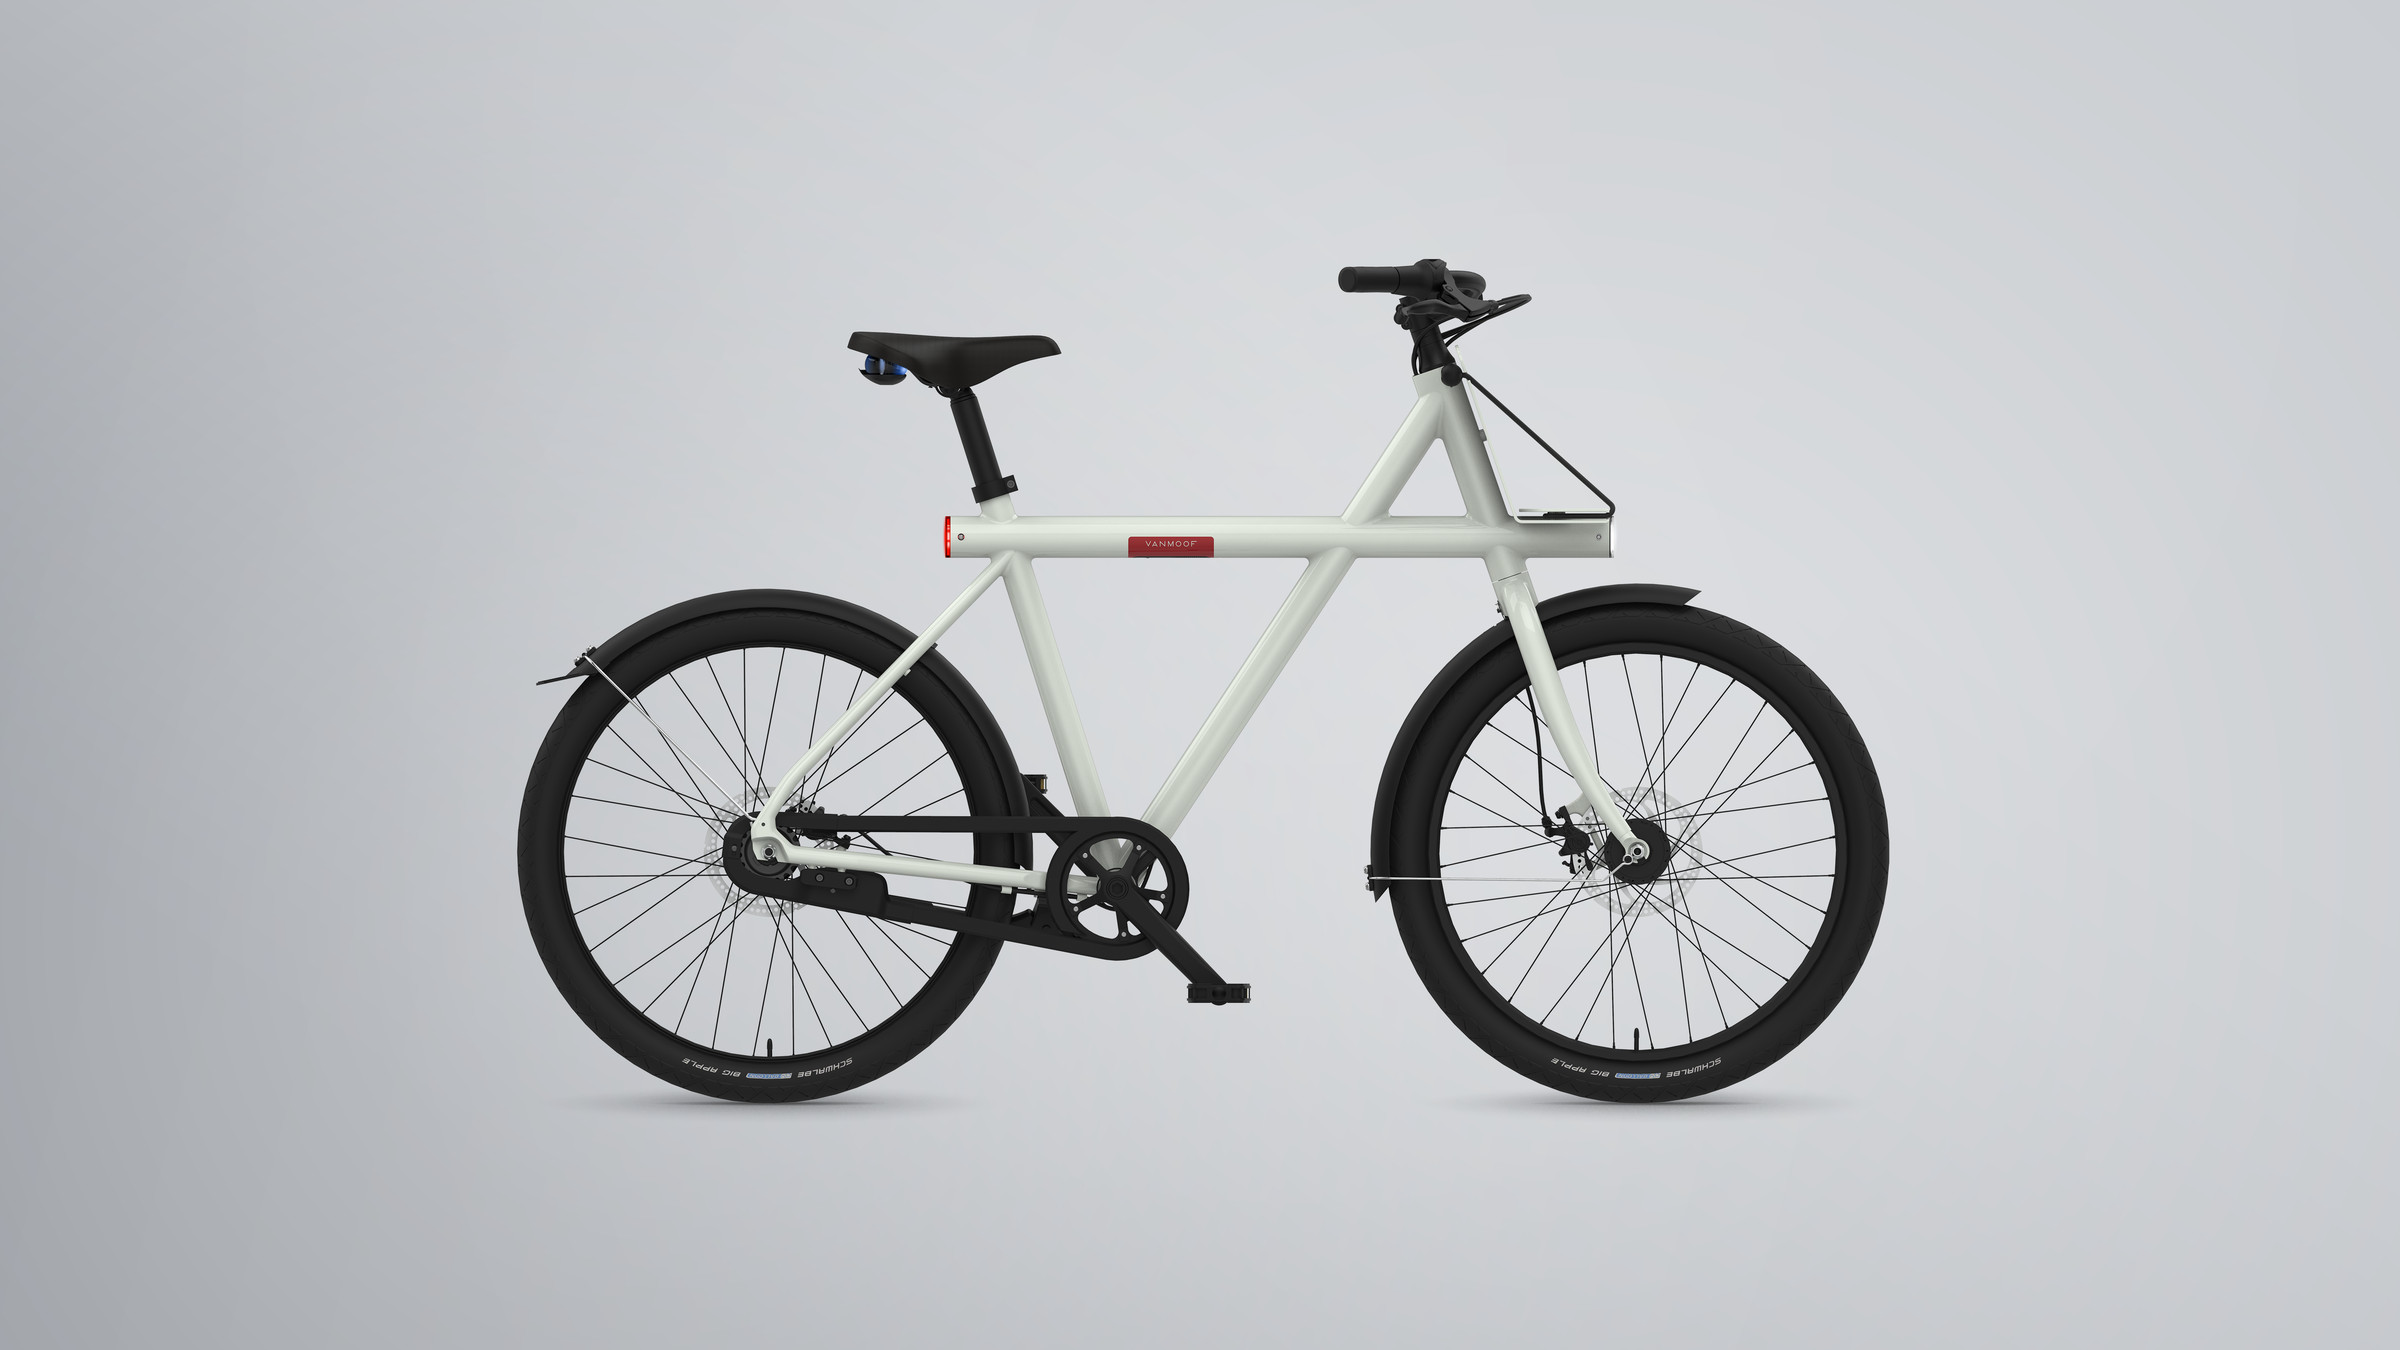 The Smart X bike announced today and available with VanMoof Plus subscriptions.